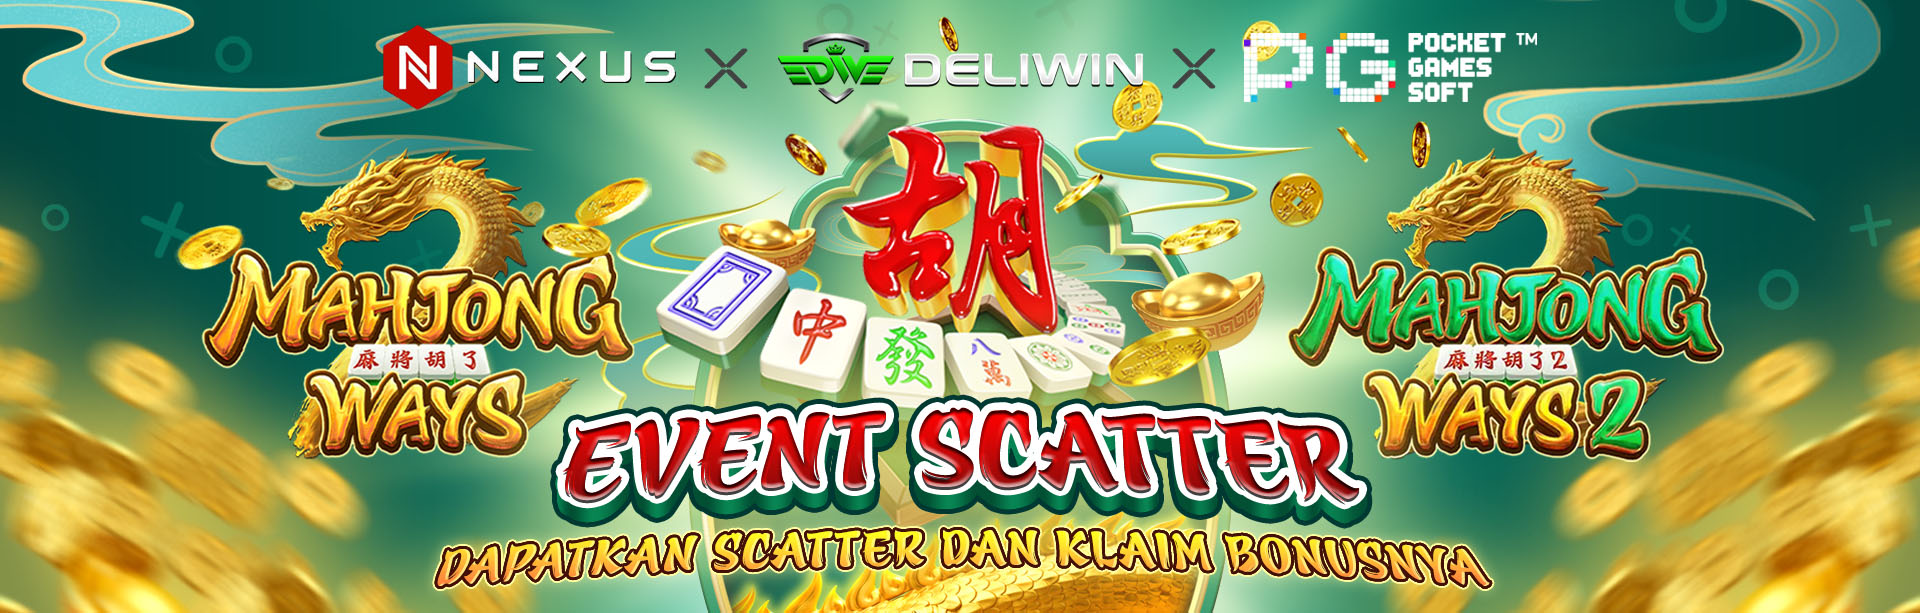 SPECIAL EVENT SCATTER MAHJONG WAYS DELIWIN X PG SOFT